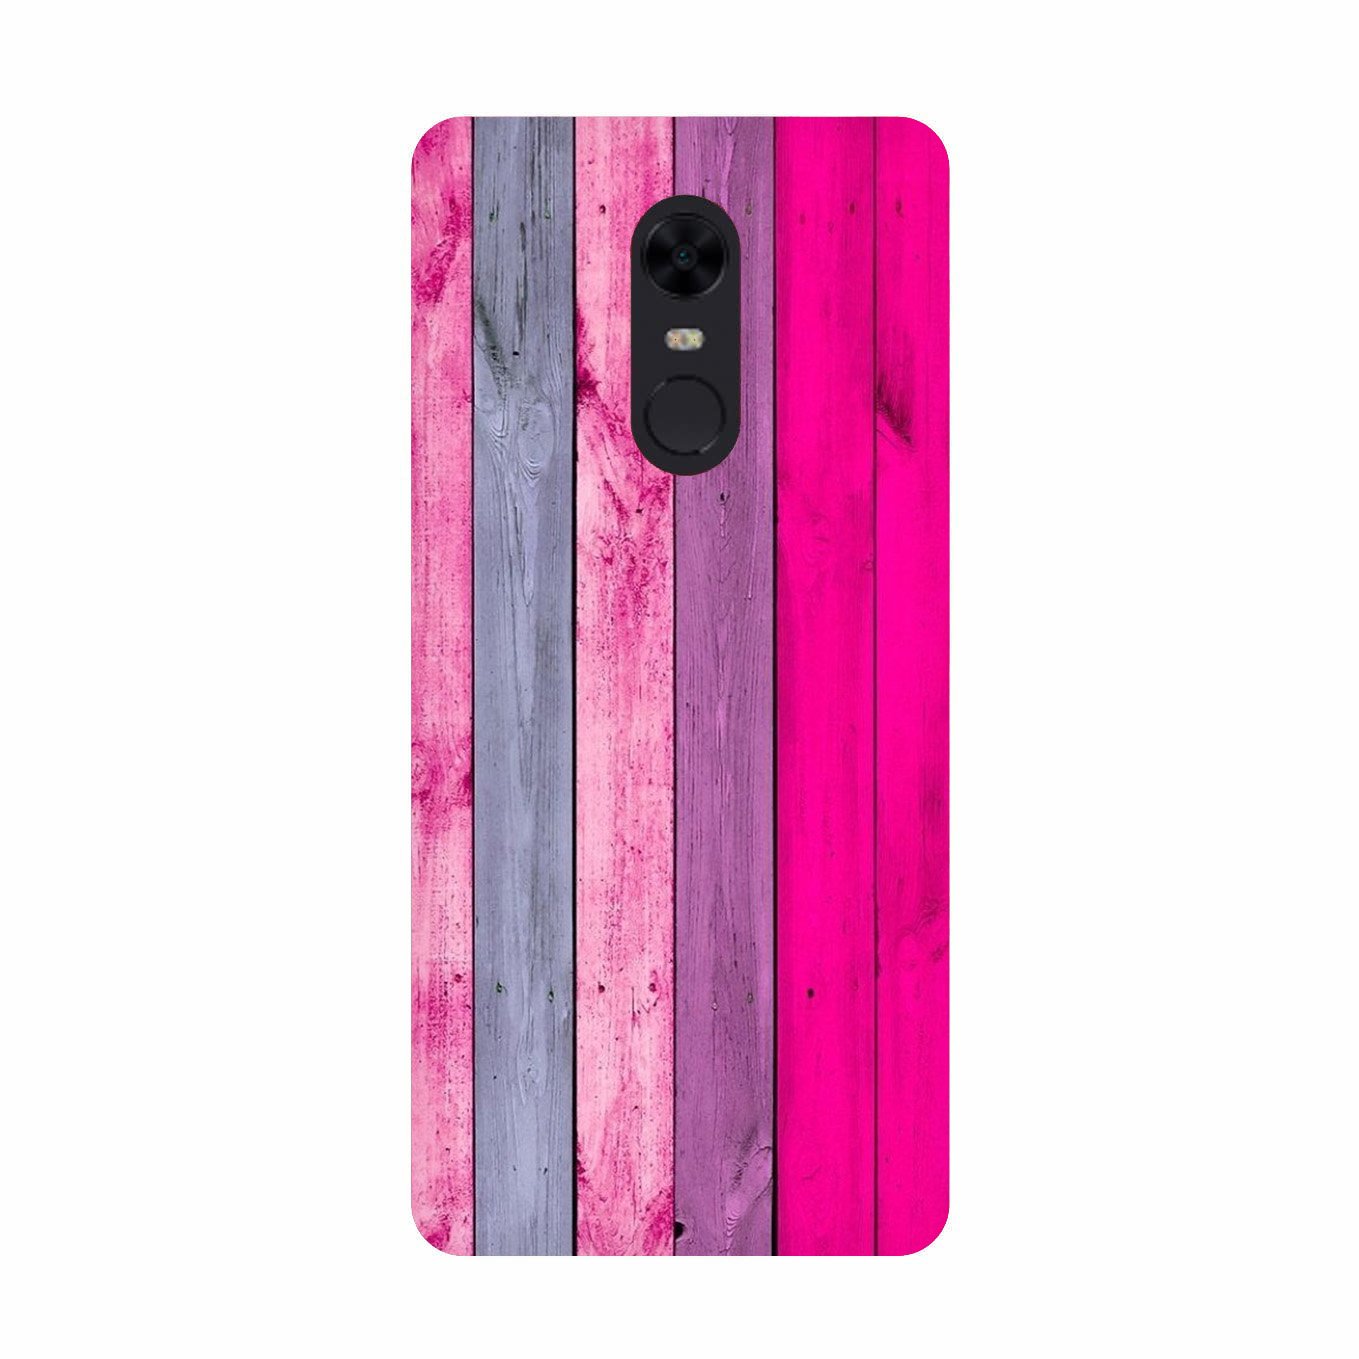 Wooden look Case for Redmi Note 5